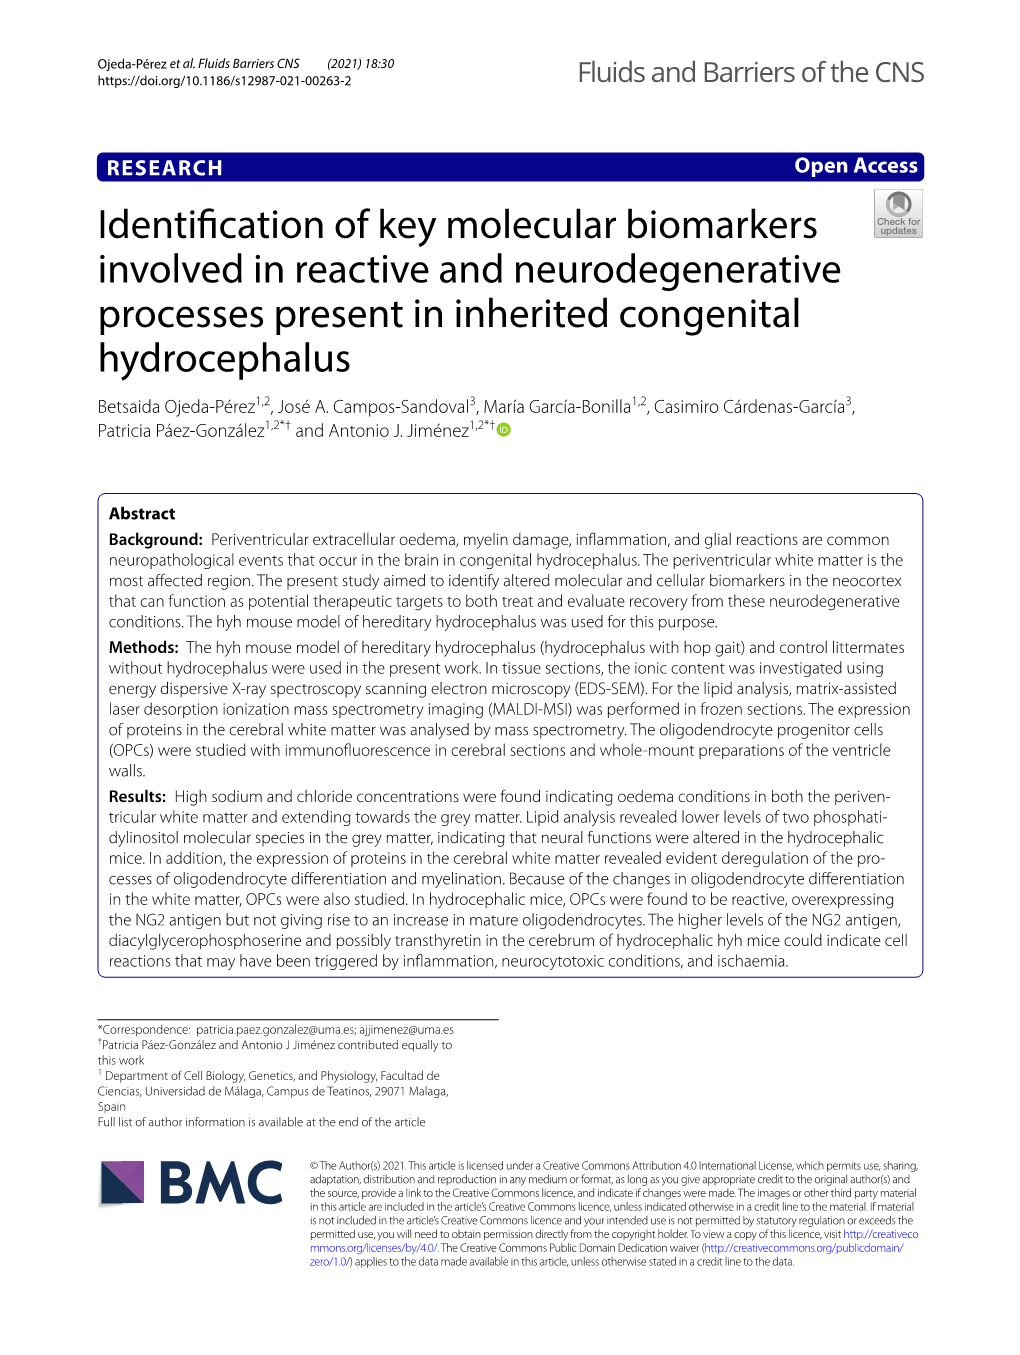 Identification of Key Molecular Biomarkers Involved in Reactive And